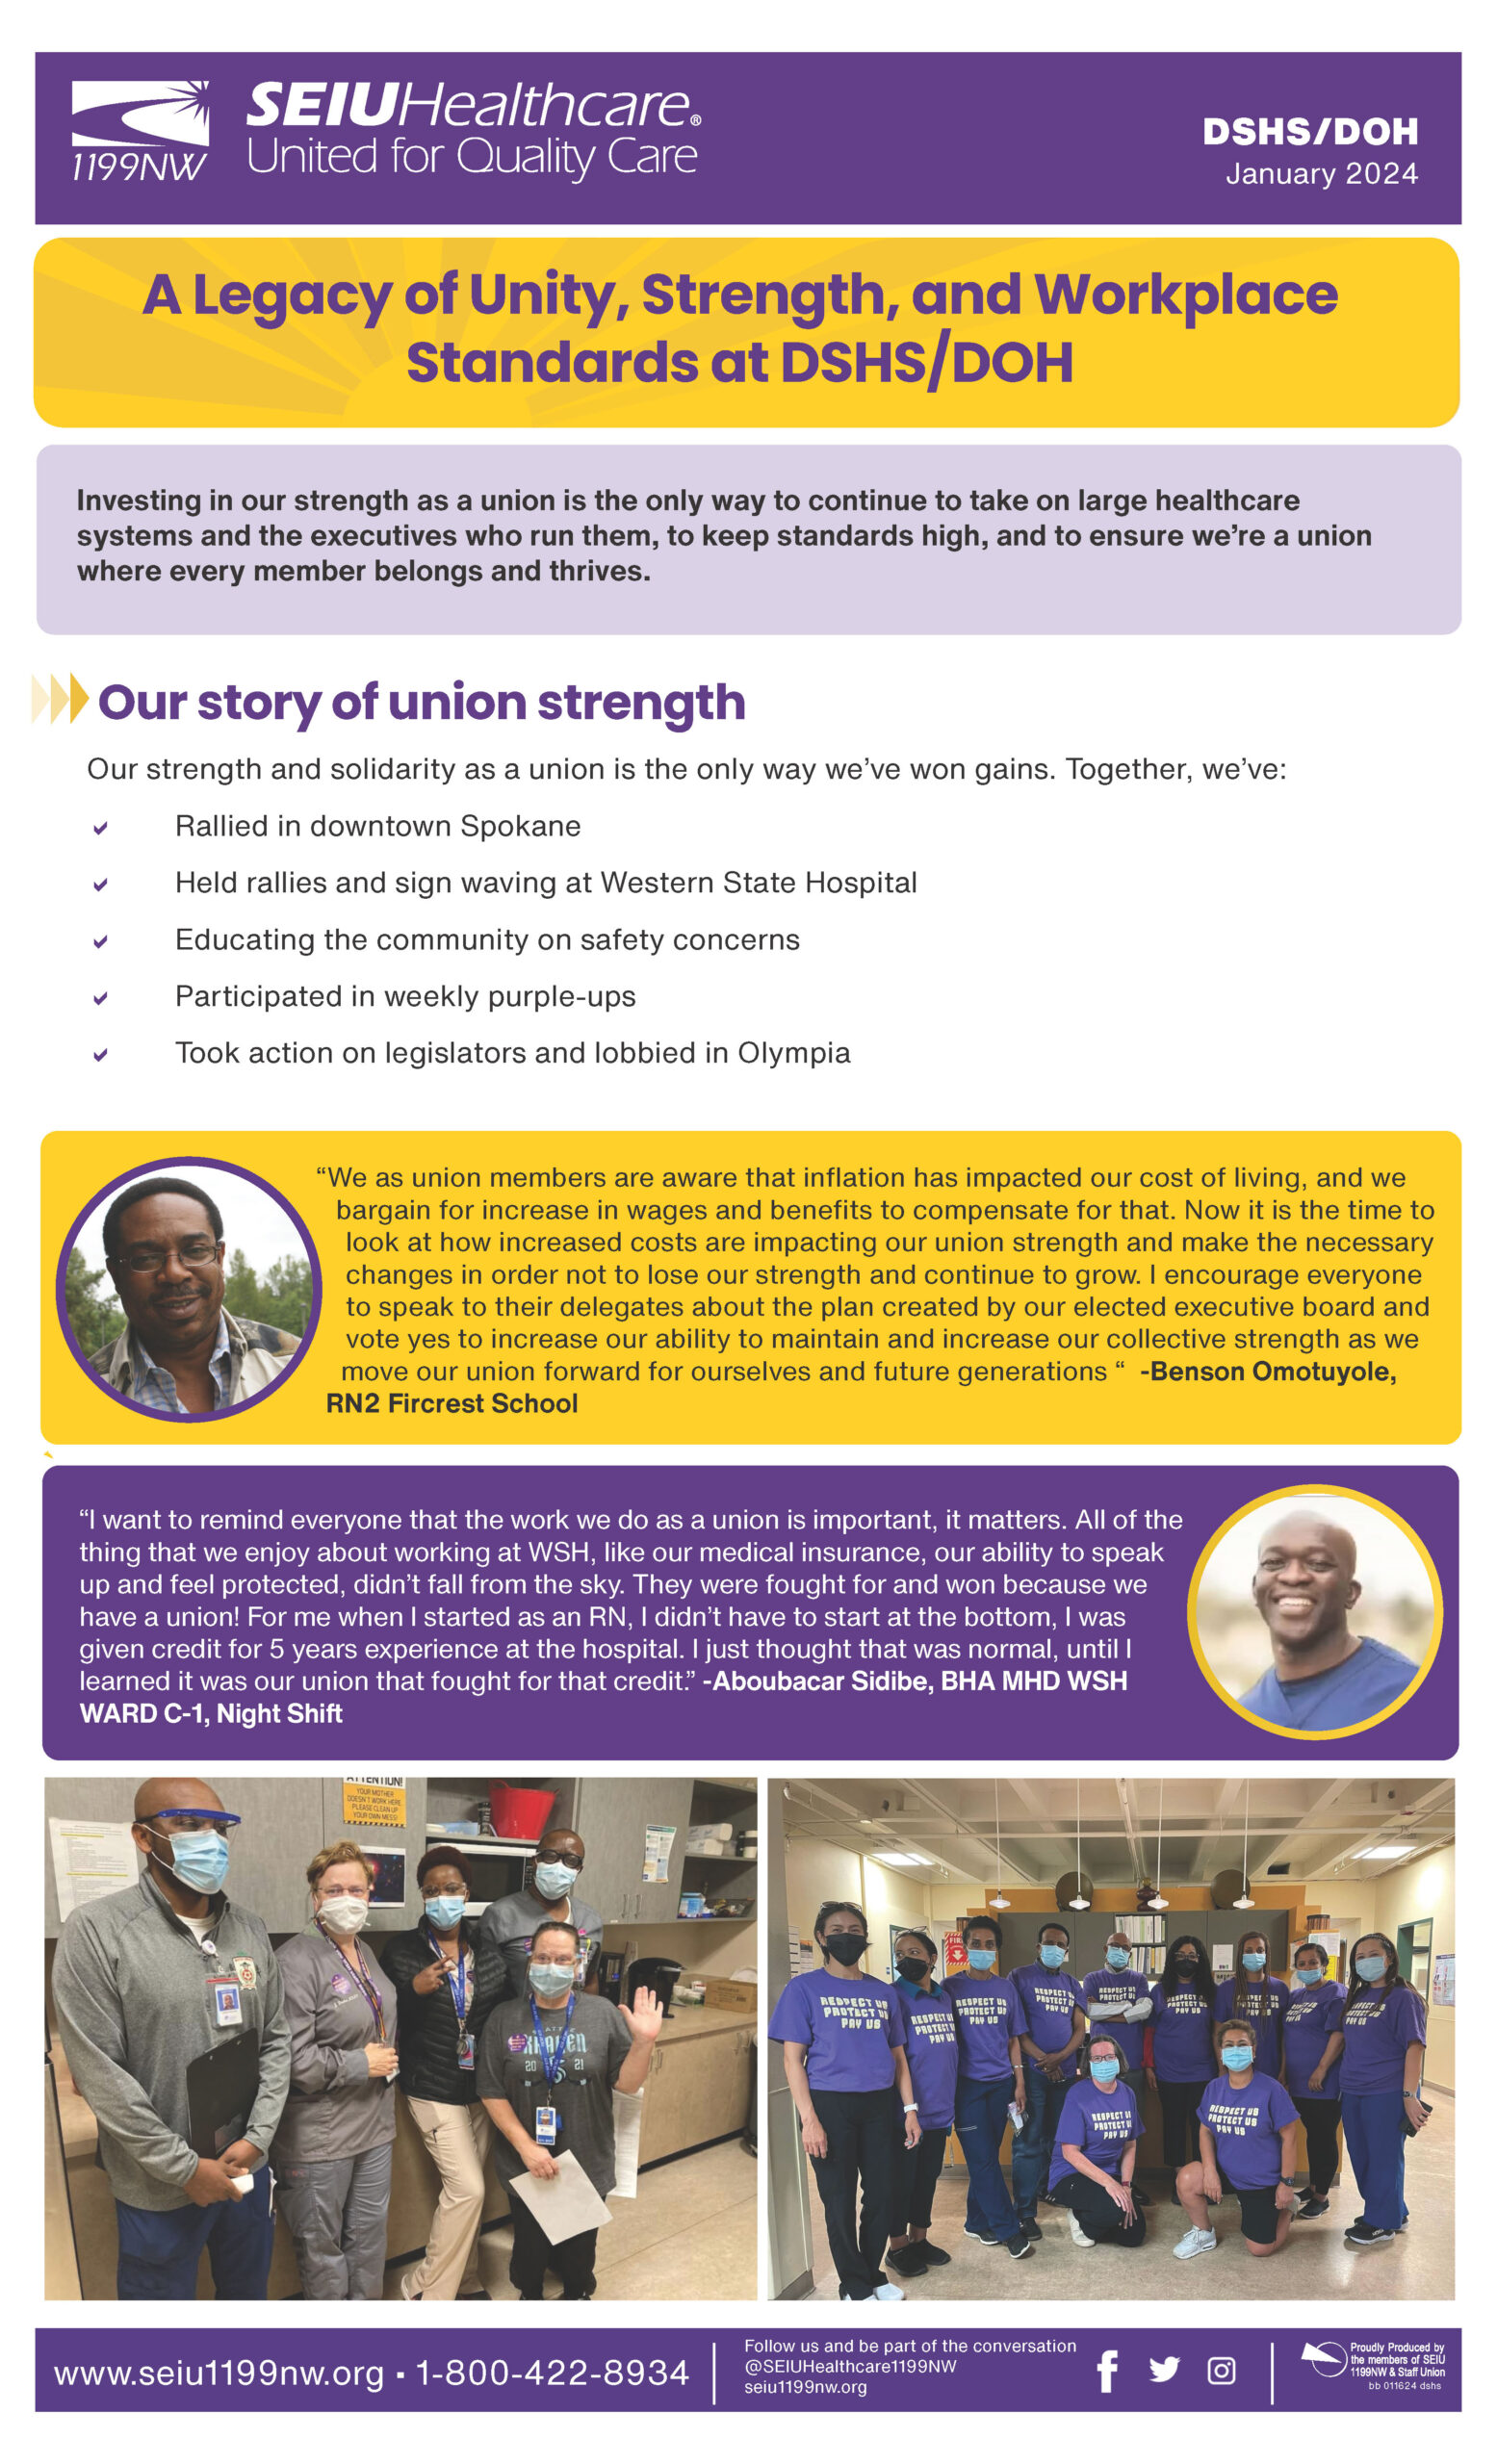 A Legacy of Unity, Strength, and Workplace Standards at DSHS/DOH